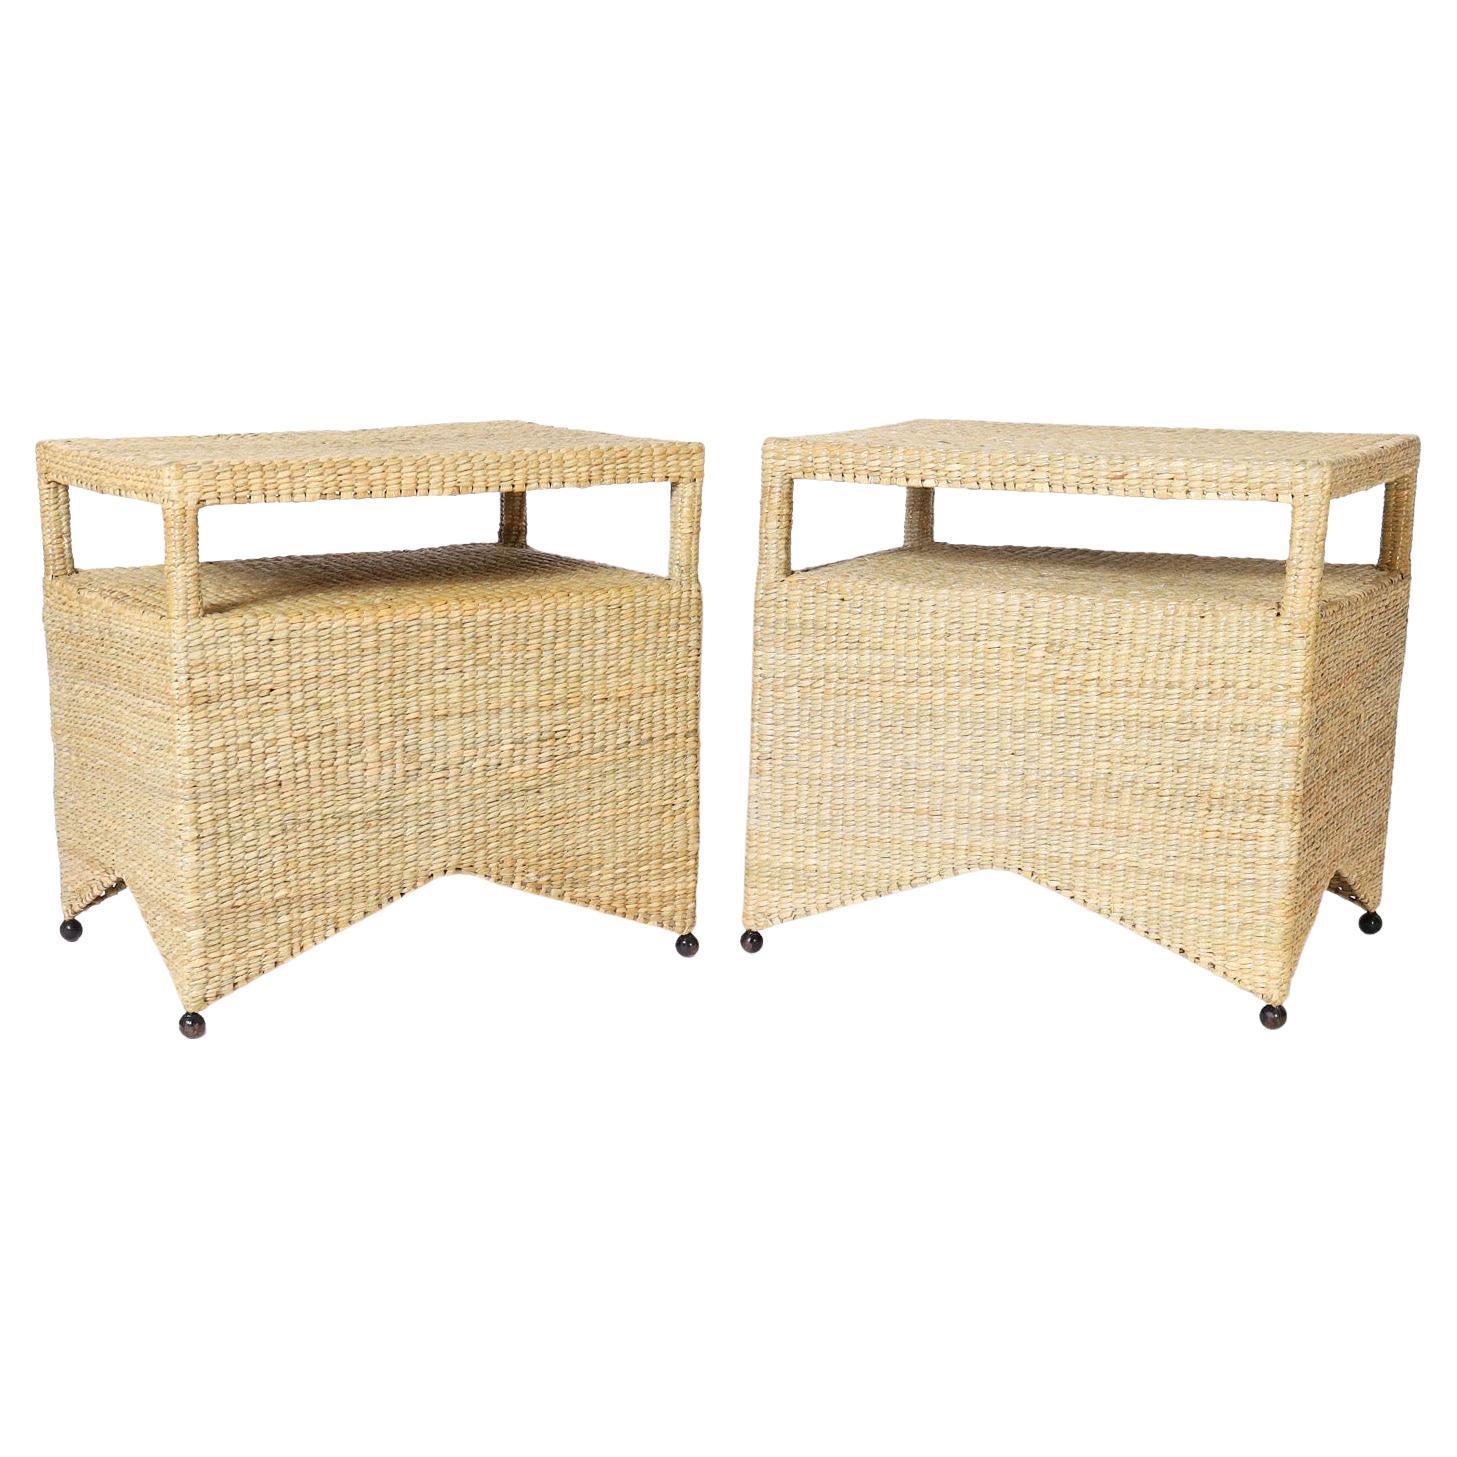 Pair of Two Tiered Wicker Stands from the FS Flores Collection